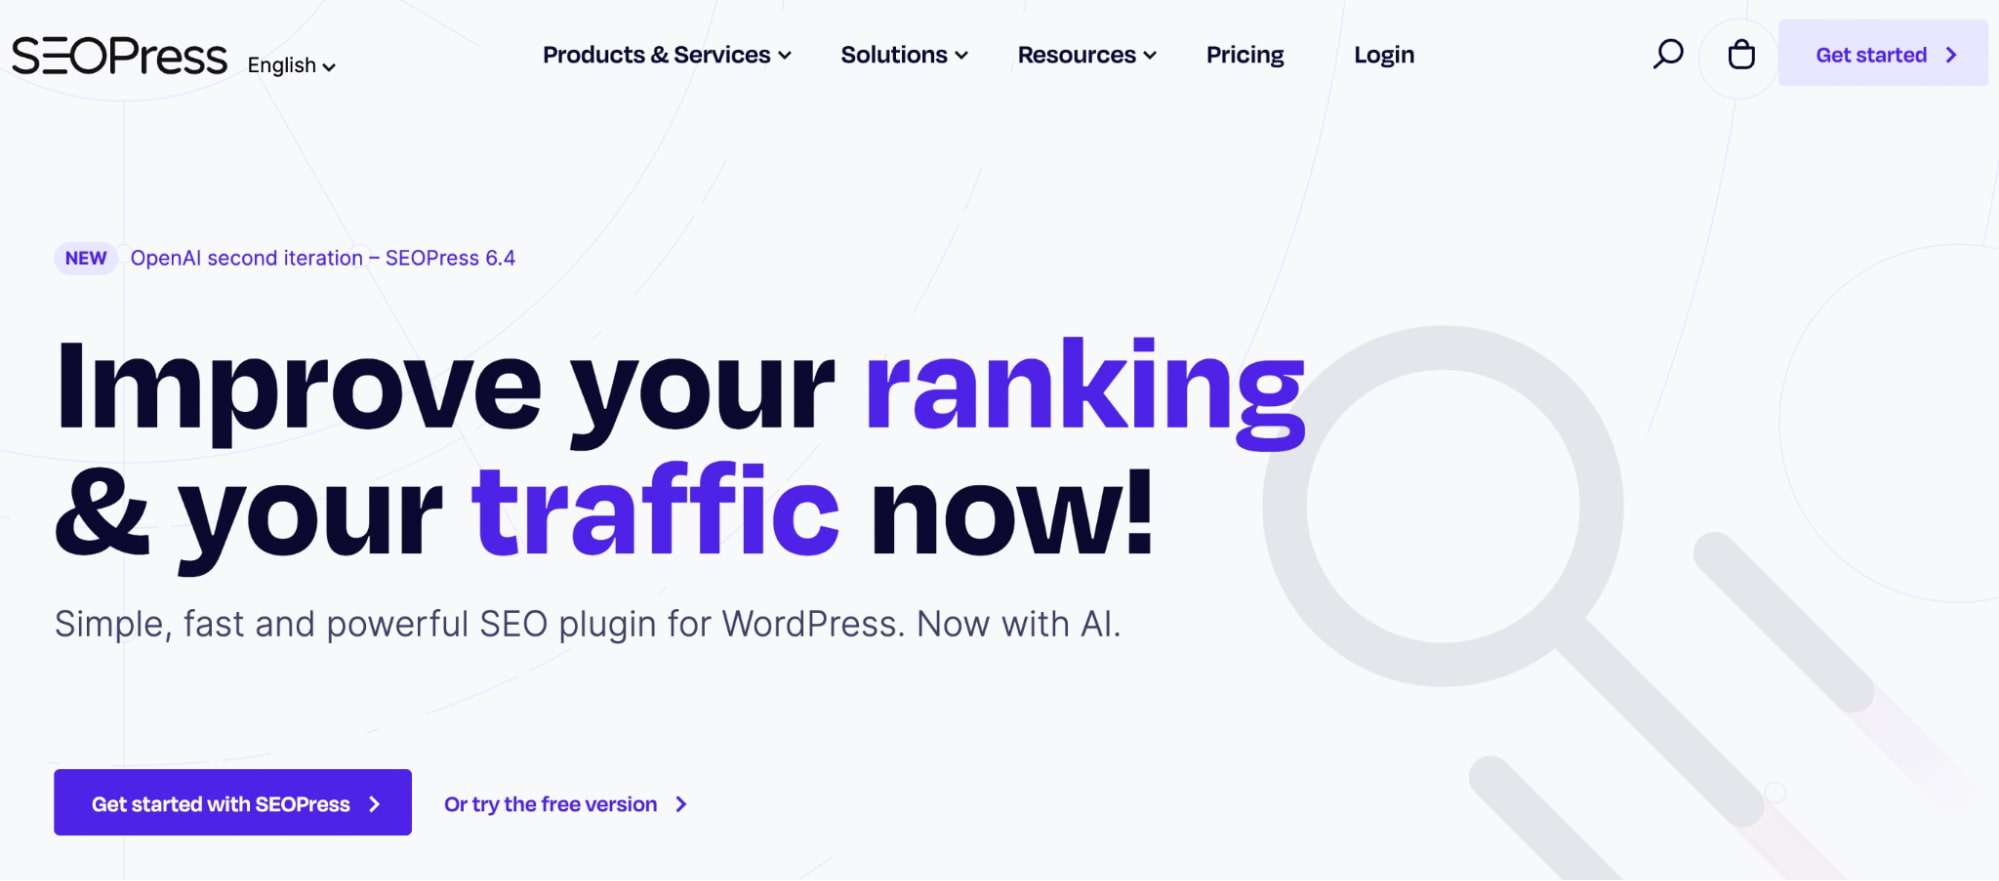 SEOPress is one of the best free WordPress plugins for SEO.